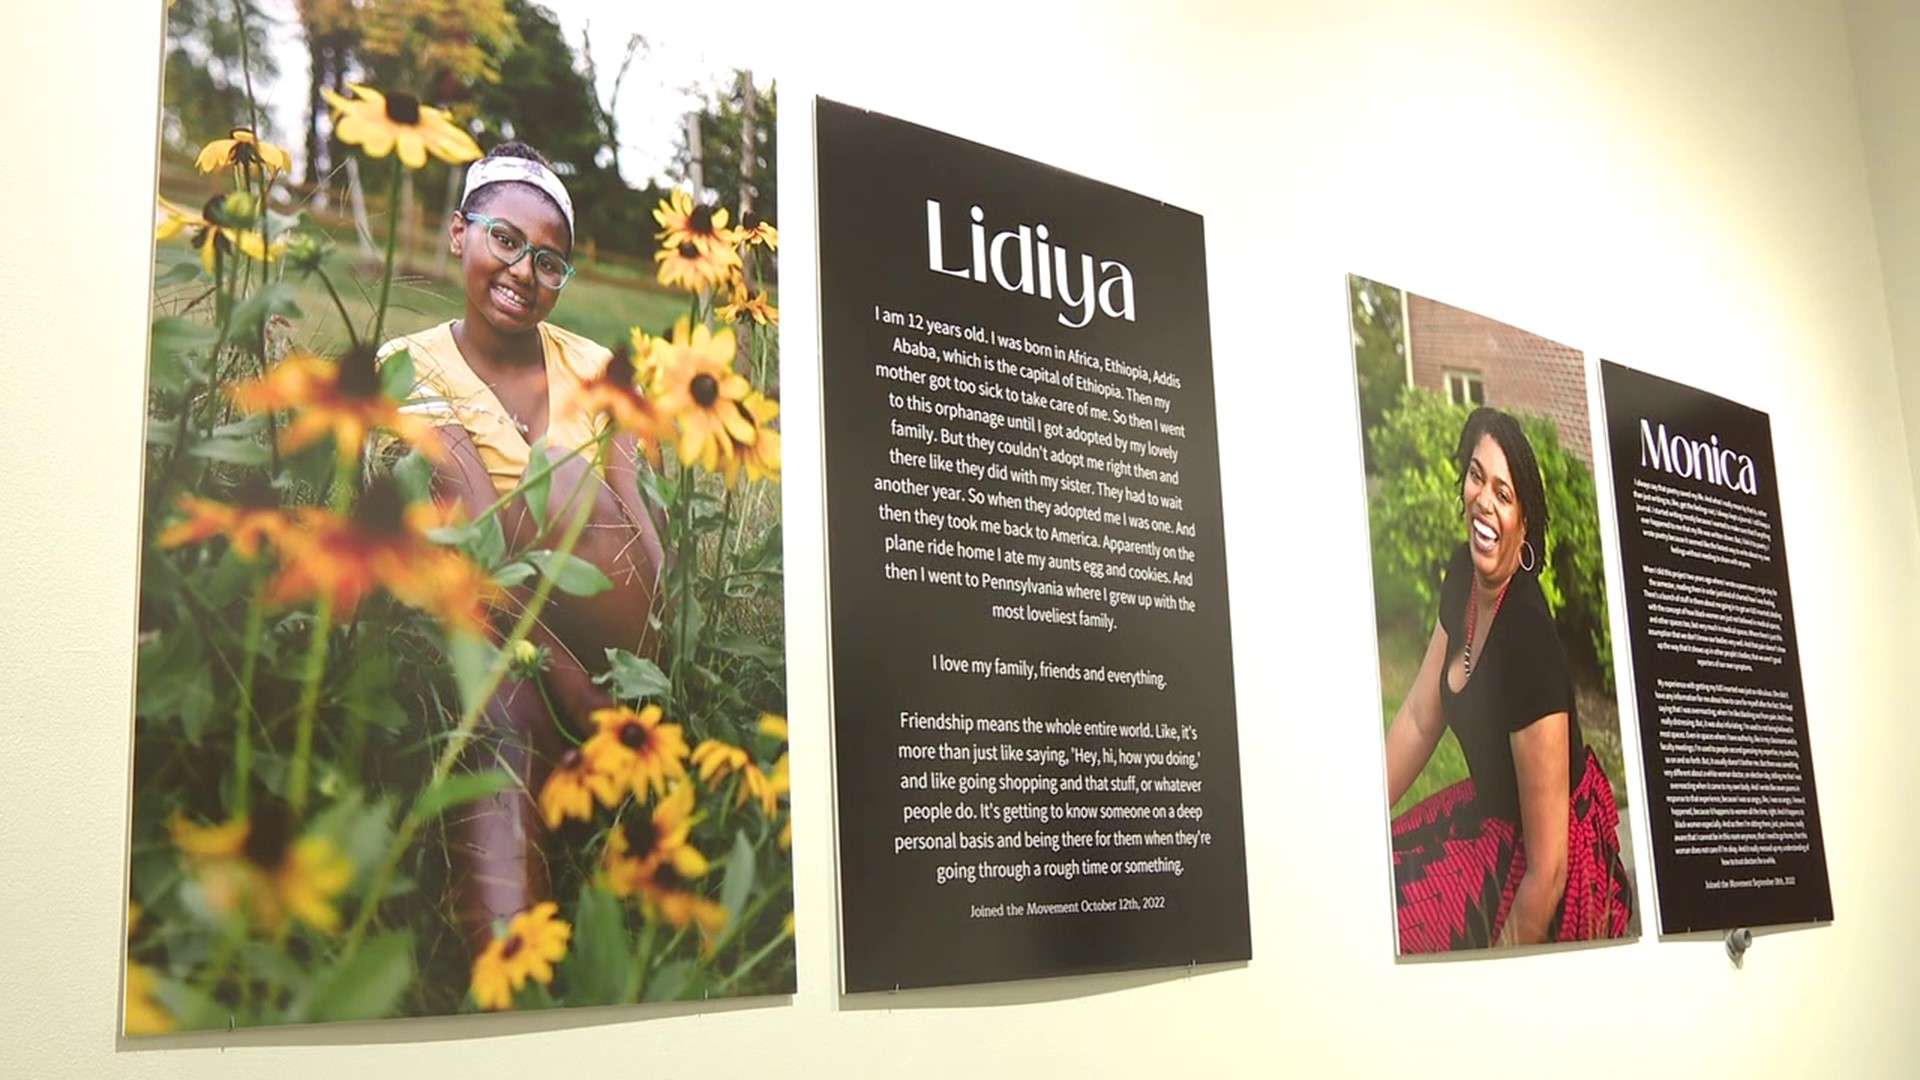 A photography display in downtown Lewisburg is showcasing people of color from central Pennsylvania.